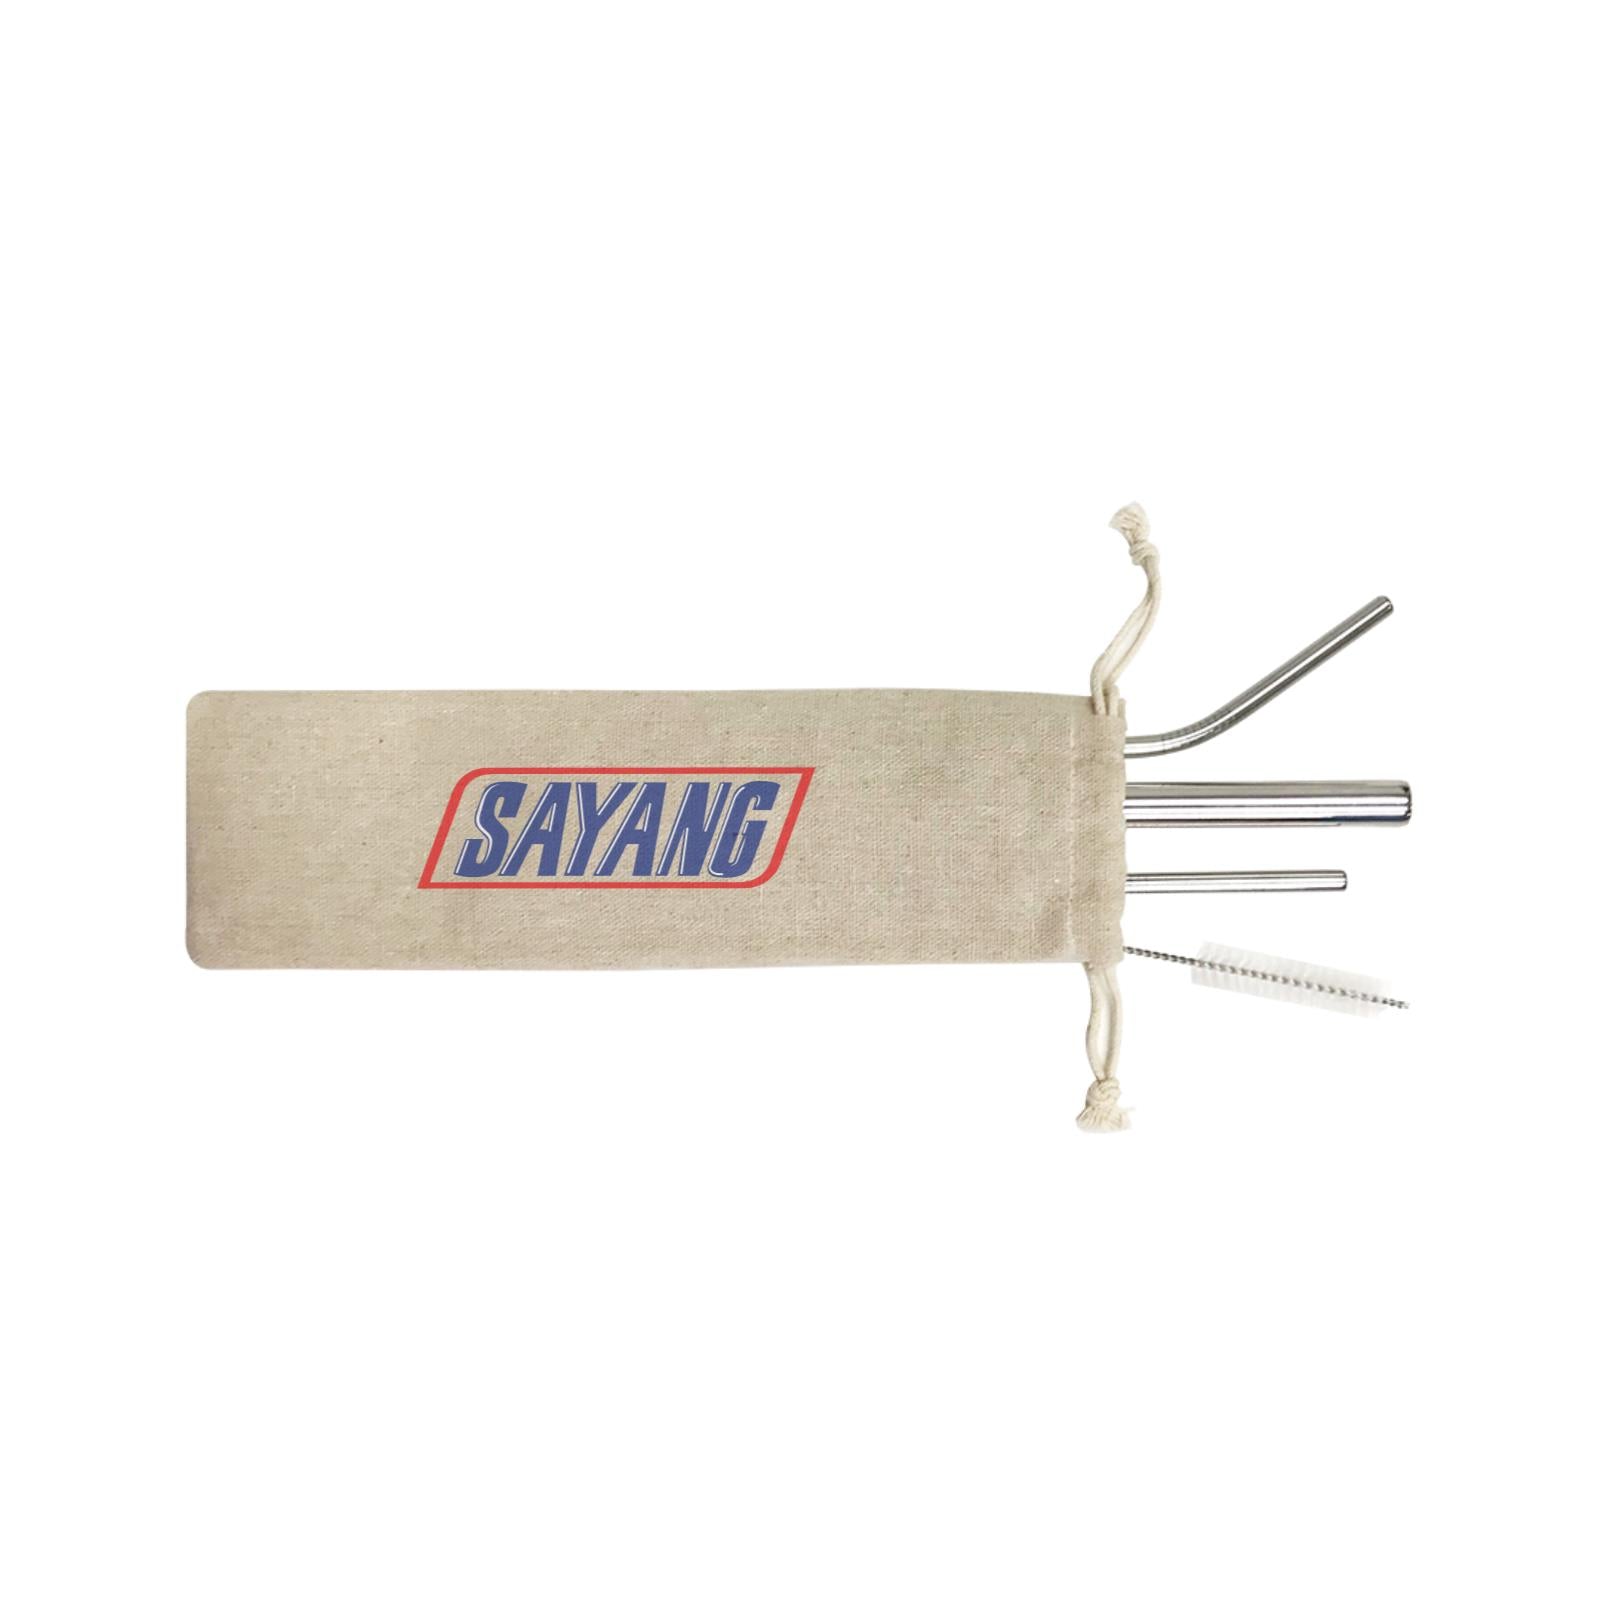 Slang Statement Sayang 4-in-1 Stainless Steel Straw Set In a Satchel